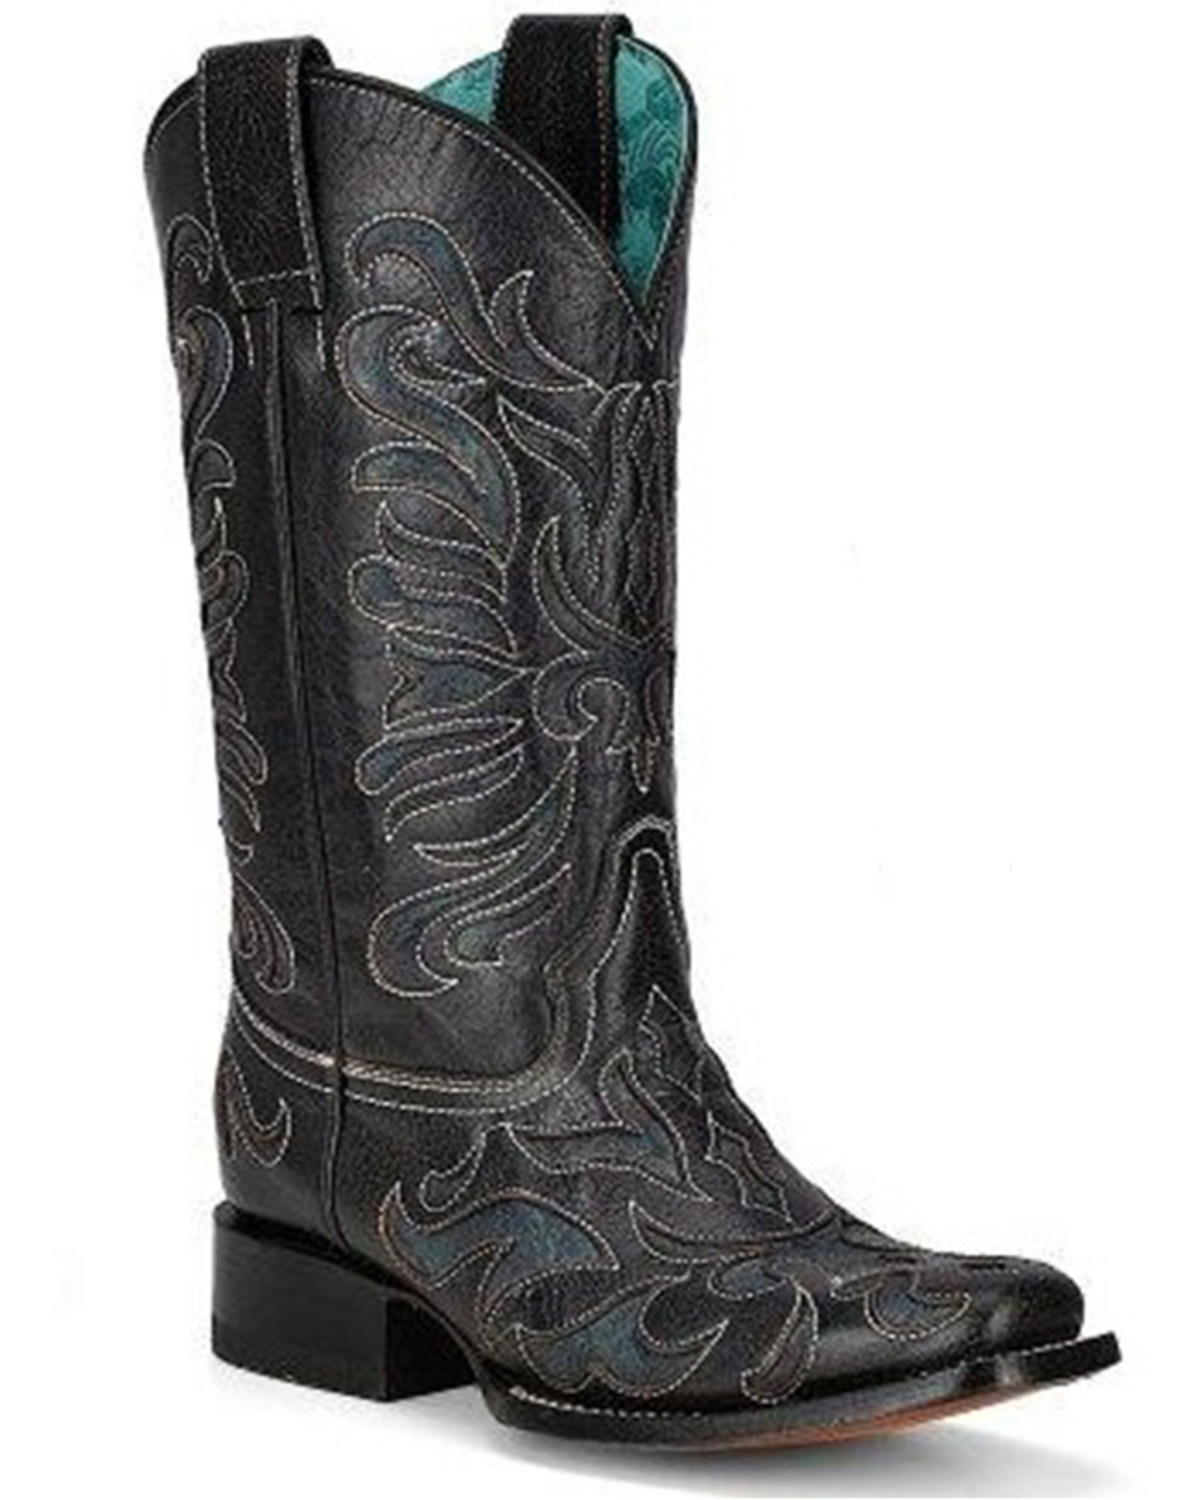 Corral Women's Embroidered Inlay Western Boots - Square Toe